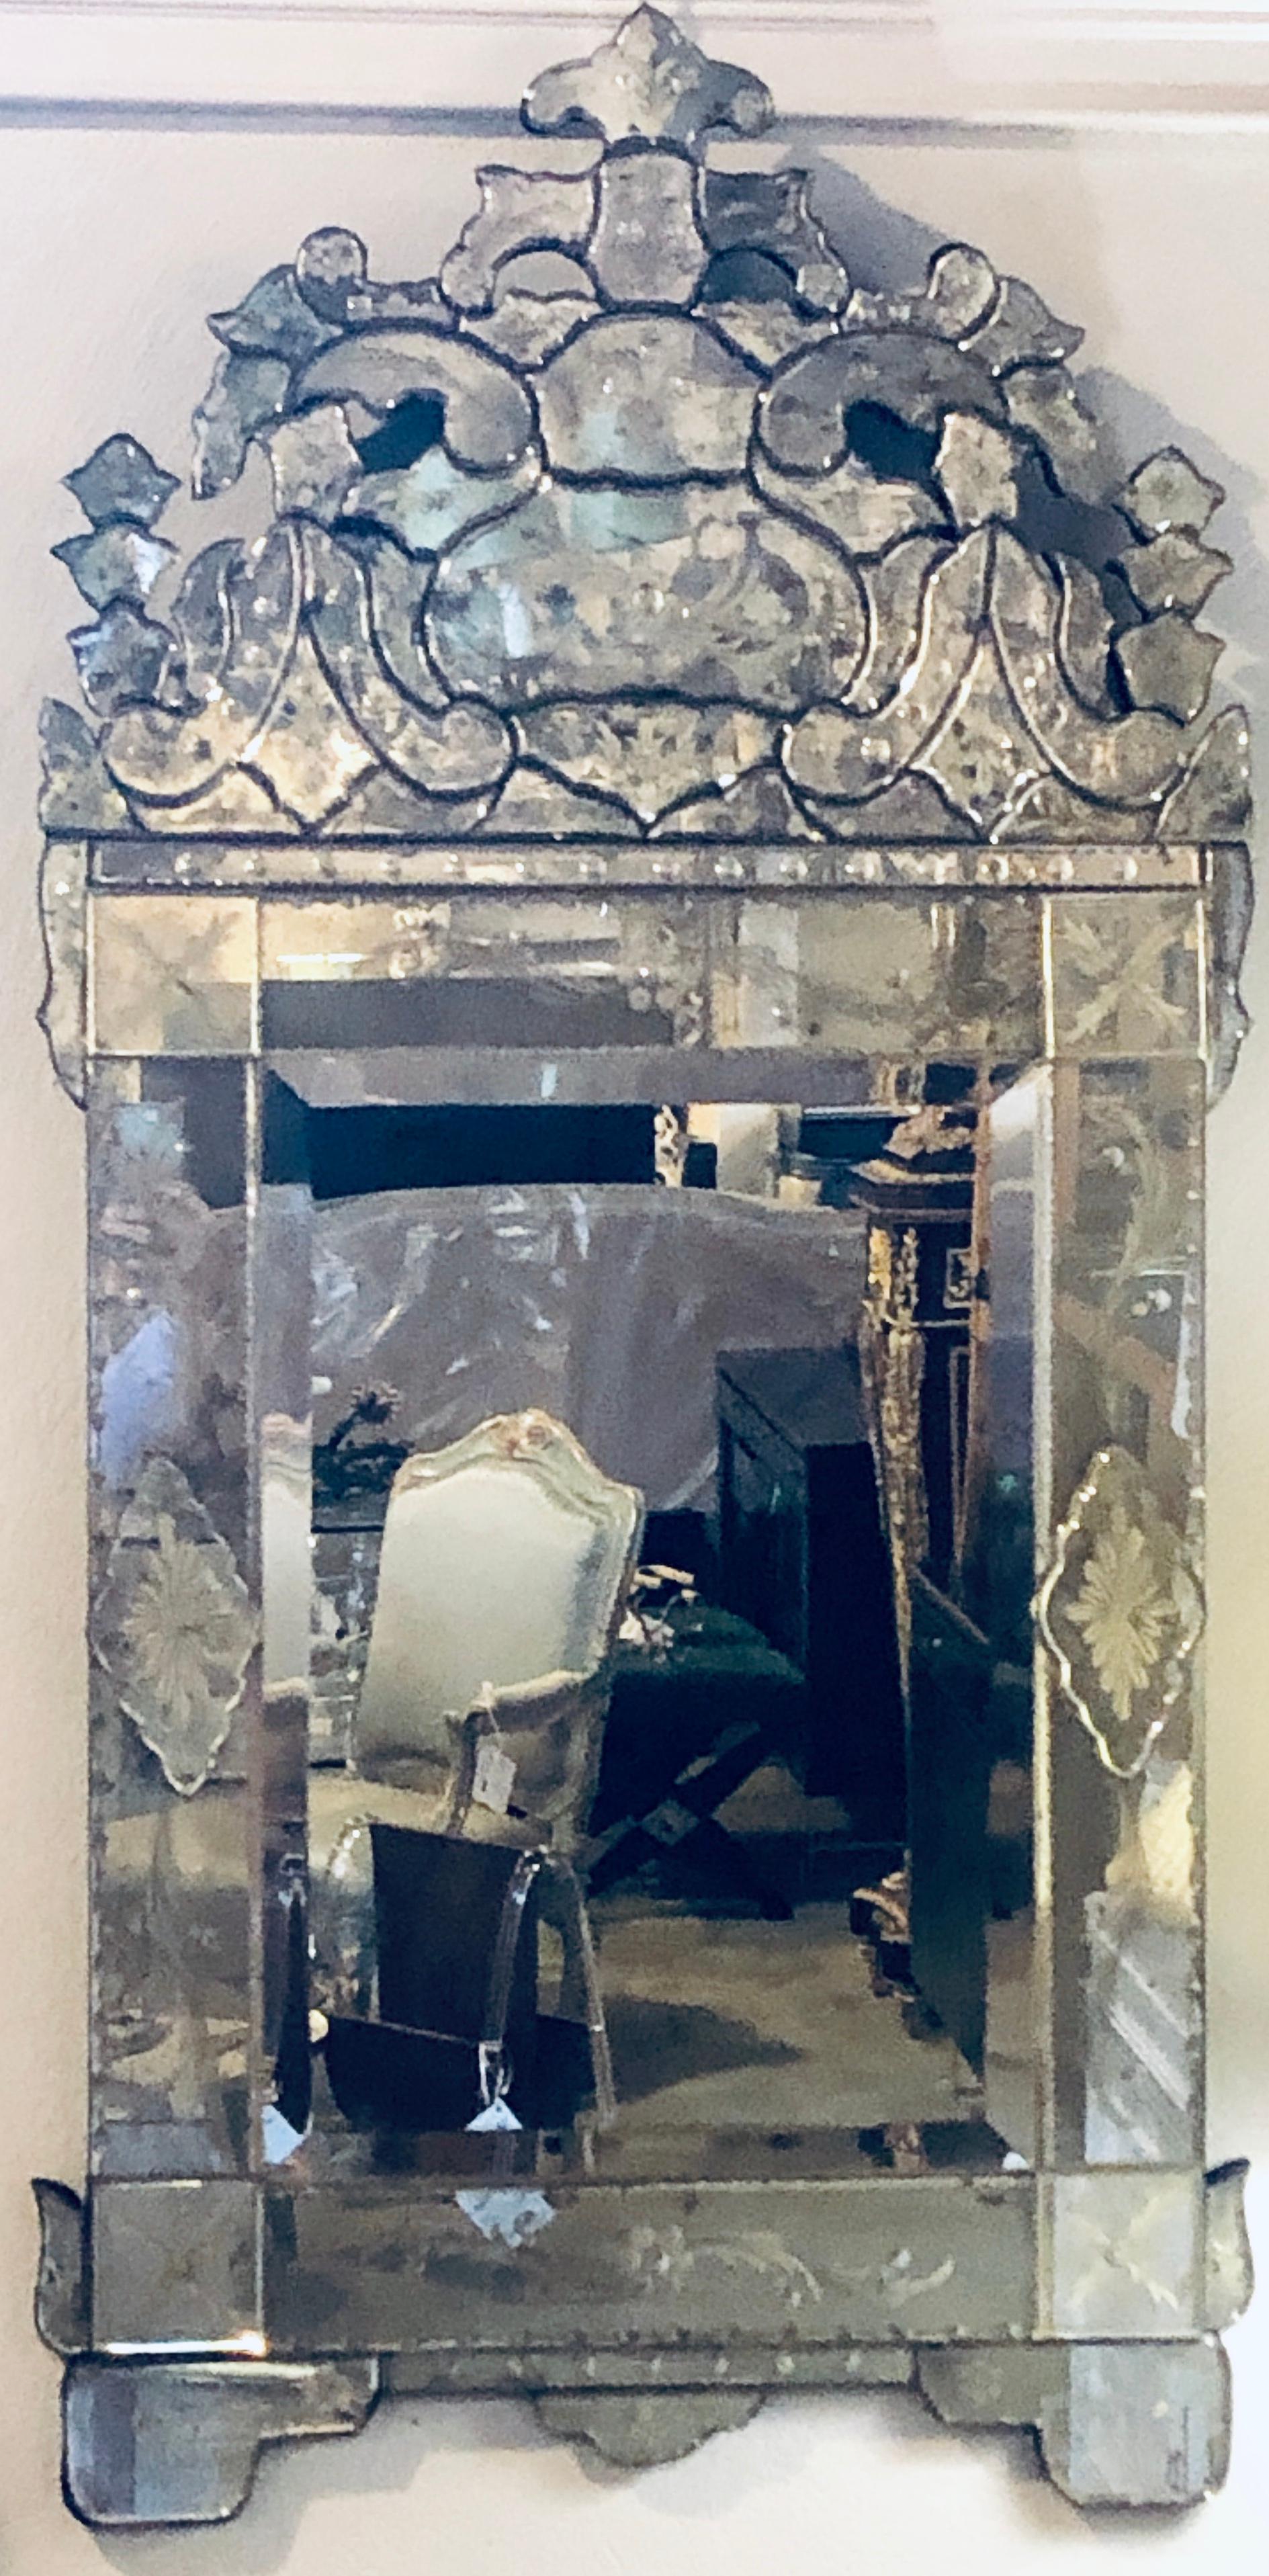 Pair of lovely Venetian style wall mirrors with beautiful etching in glass. The center panel is a clear mirror framed in a fine group of many etched glass parts with a pierced glass carved pediment top.